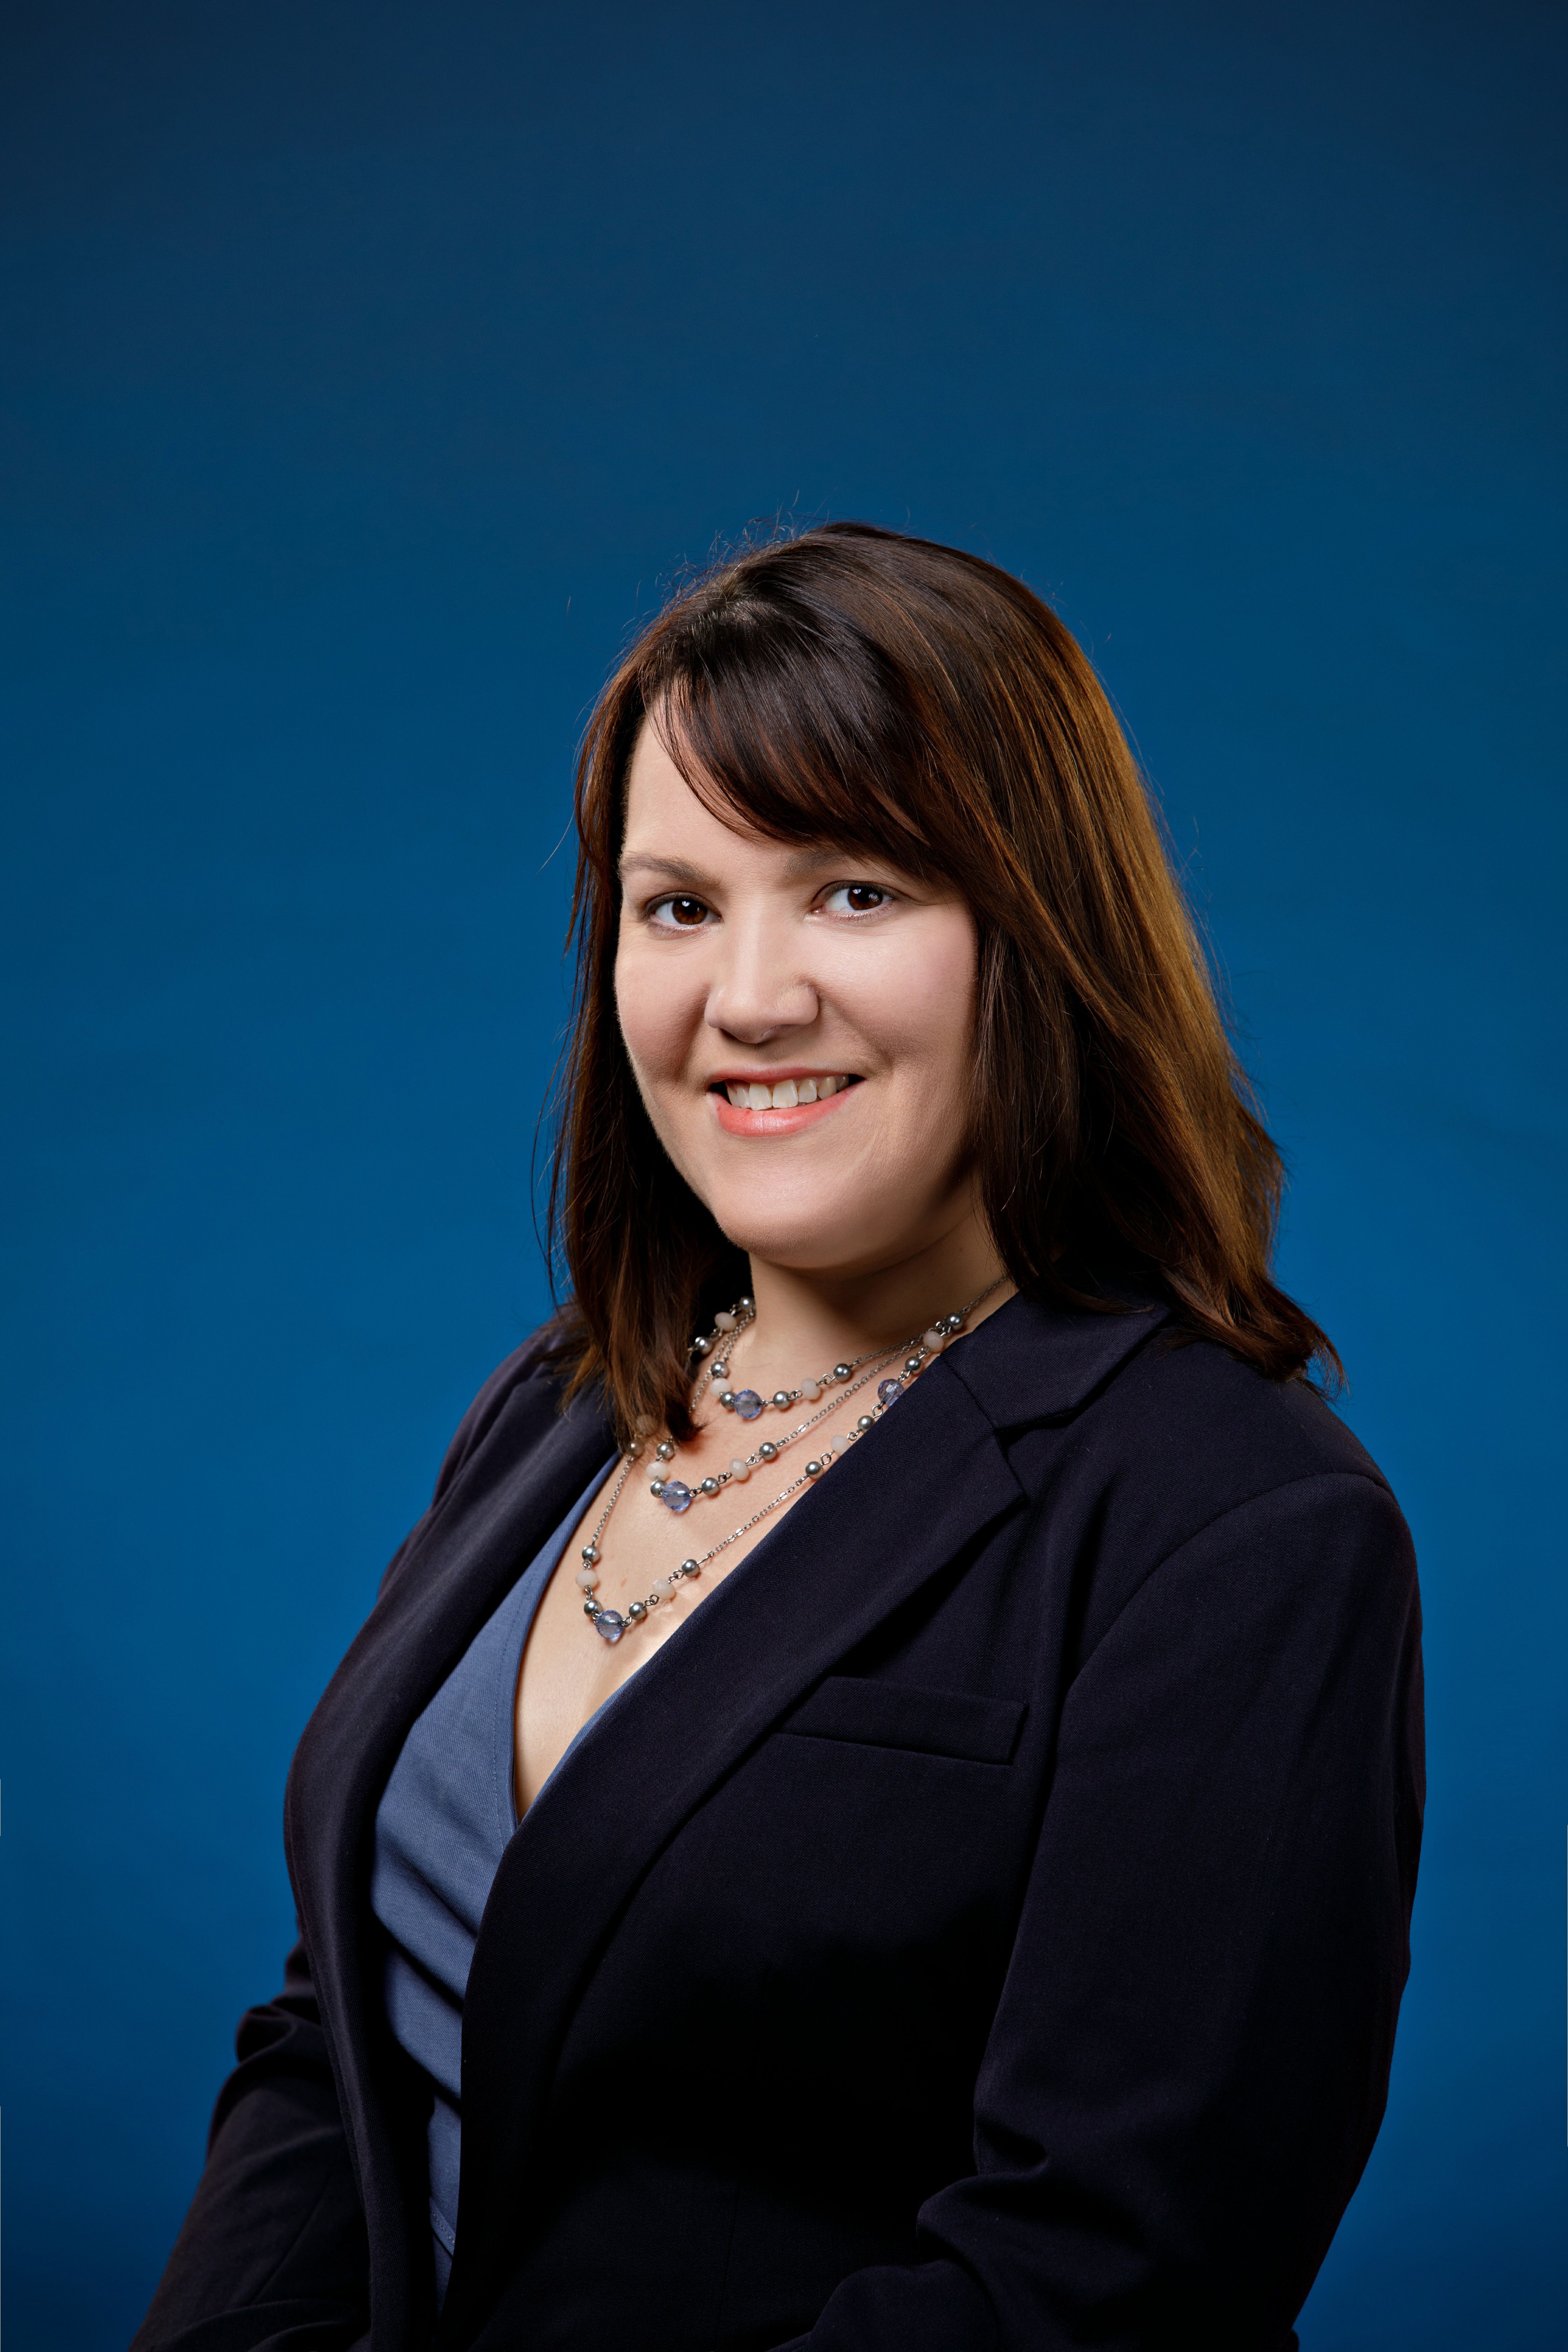 Dr. Cheryl McFarland, a white woman with brown hair, is photographed smiling and wearing a black blazer and blue shirt.